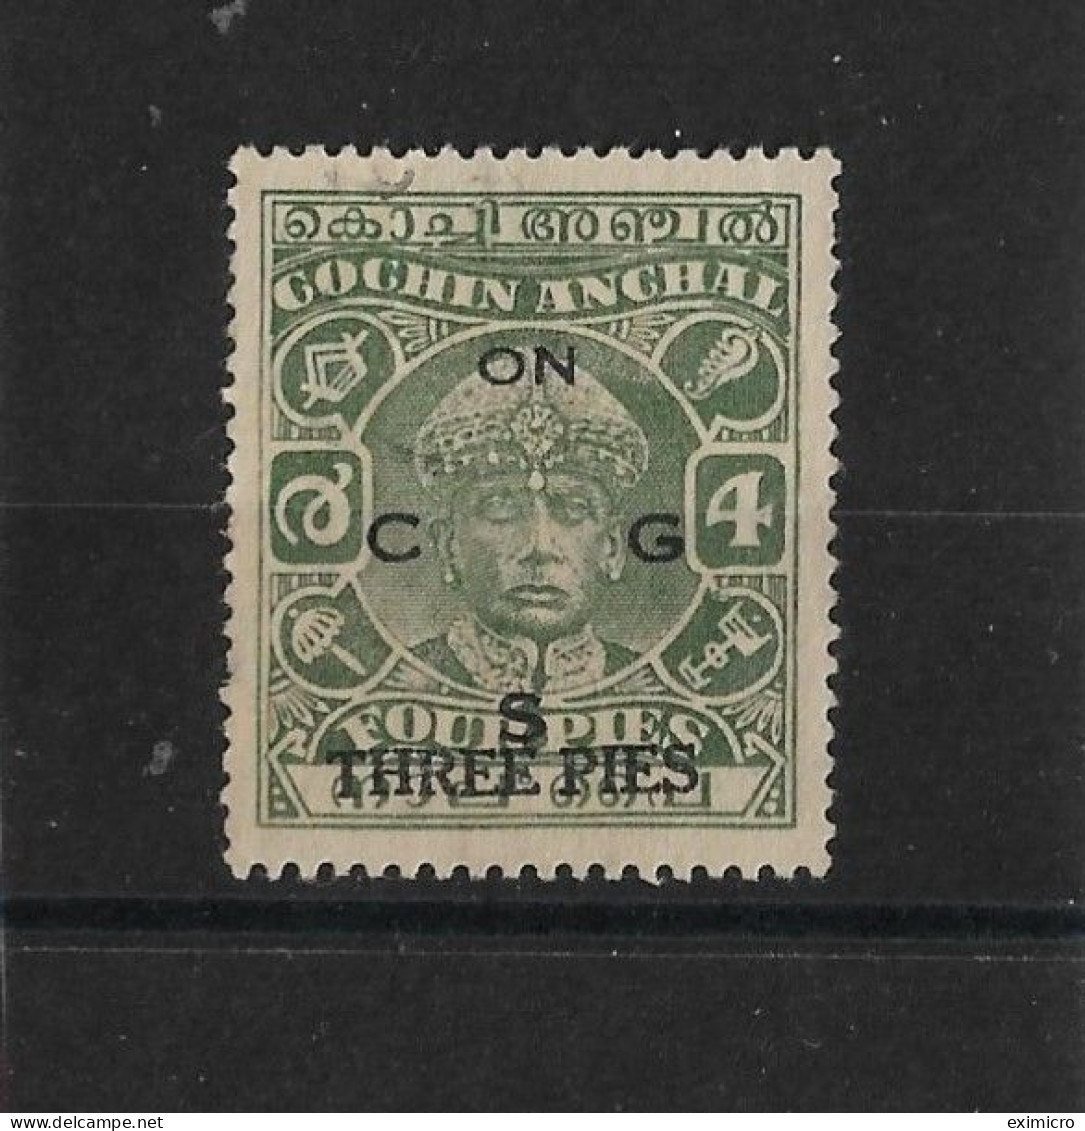 INDIA - COCHIN 1942 - 1943 SURCHARGE OFFICIAL 3p On 4p SG O67 PERF 13 X 13½ FINE USED Cat £75 - Cochin